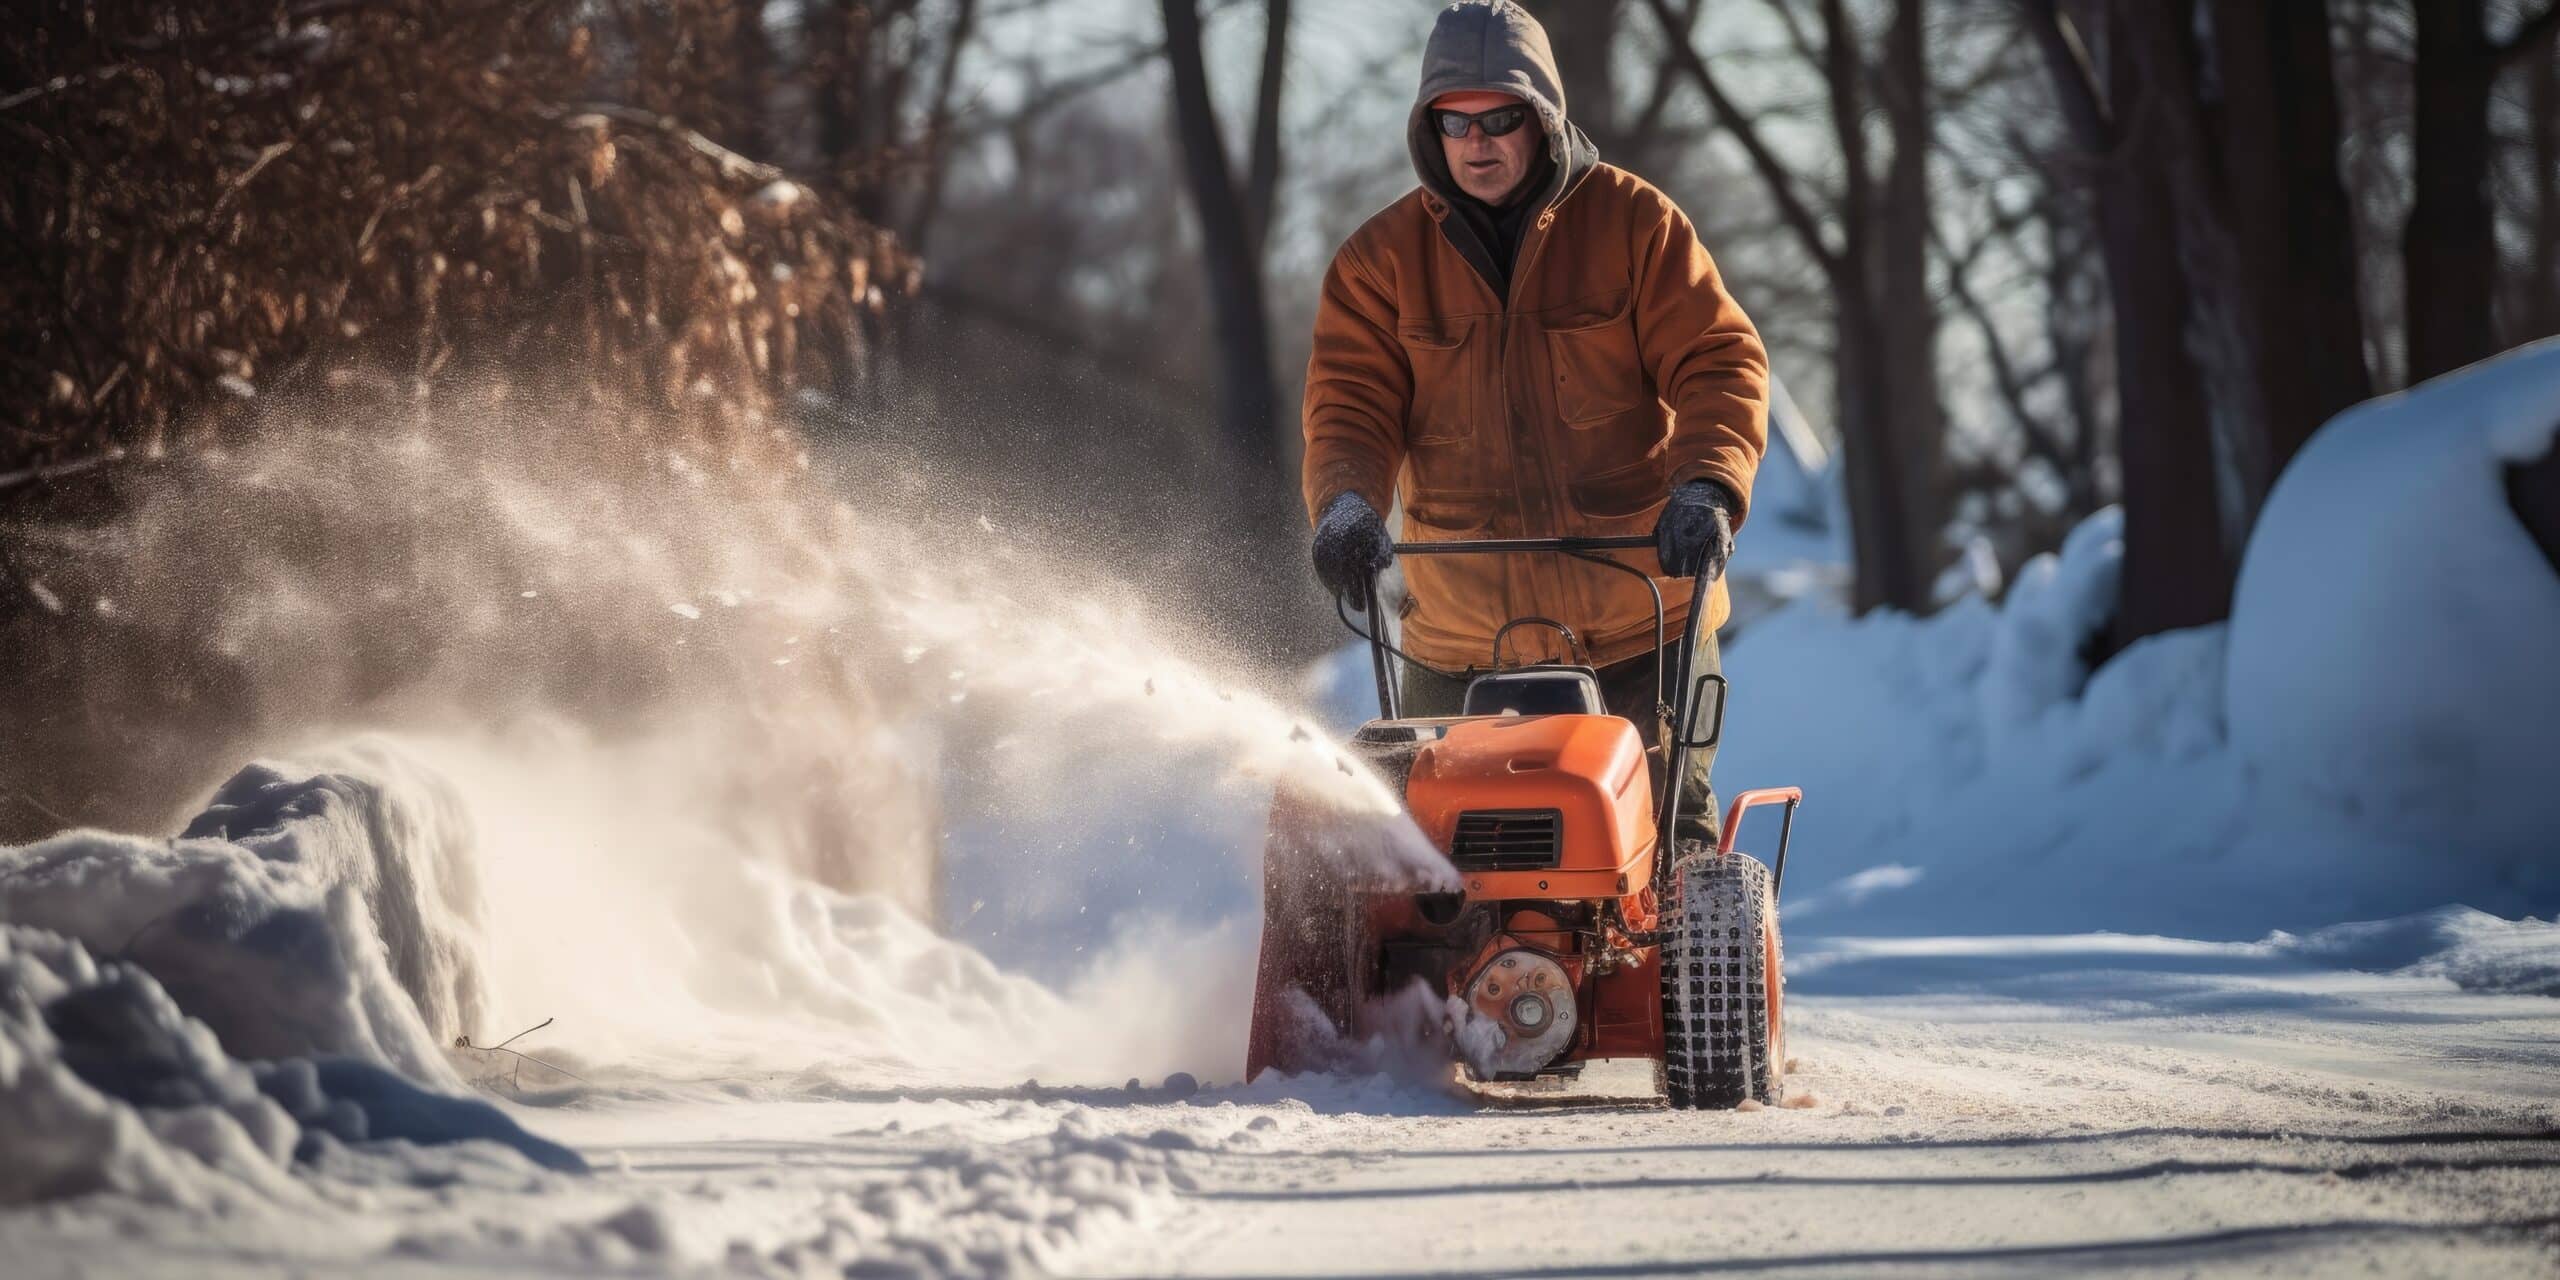 www.appr.com : How long do snow blowers typically last?